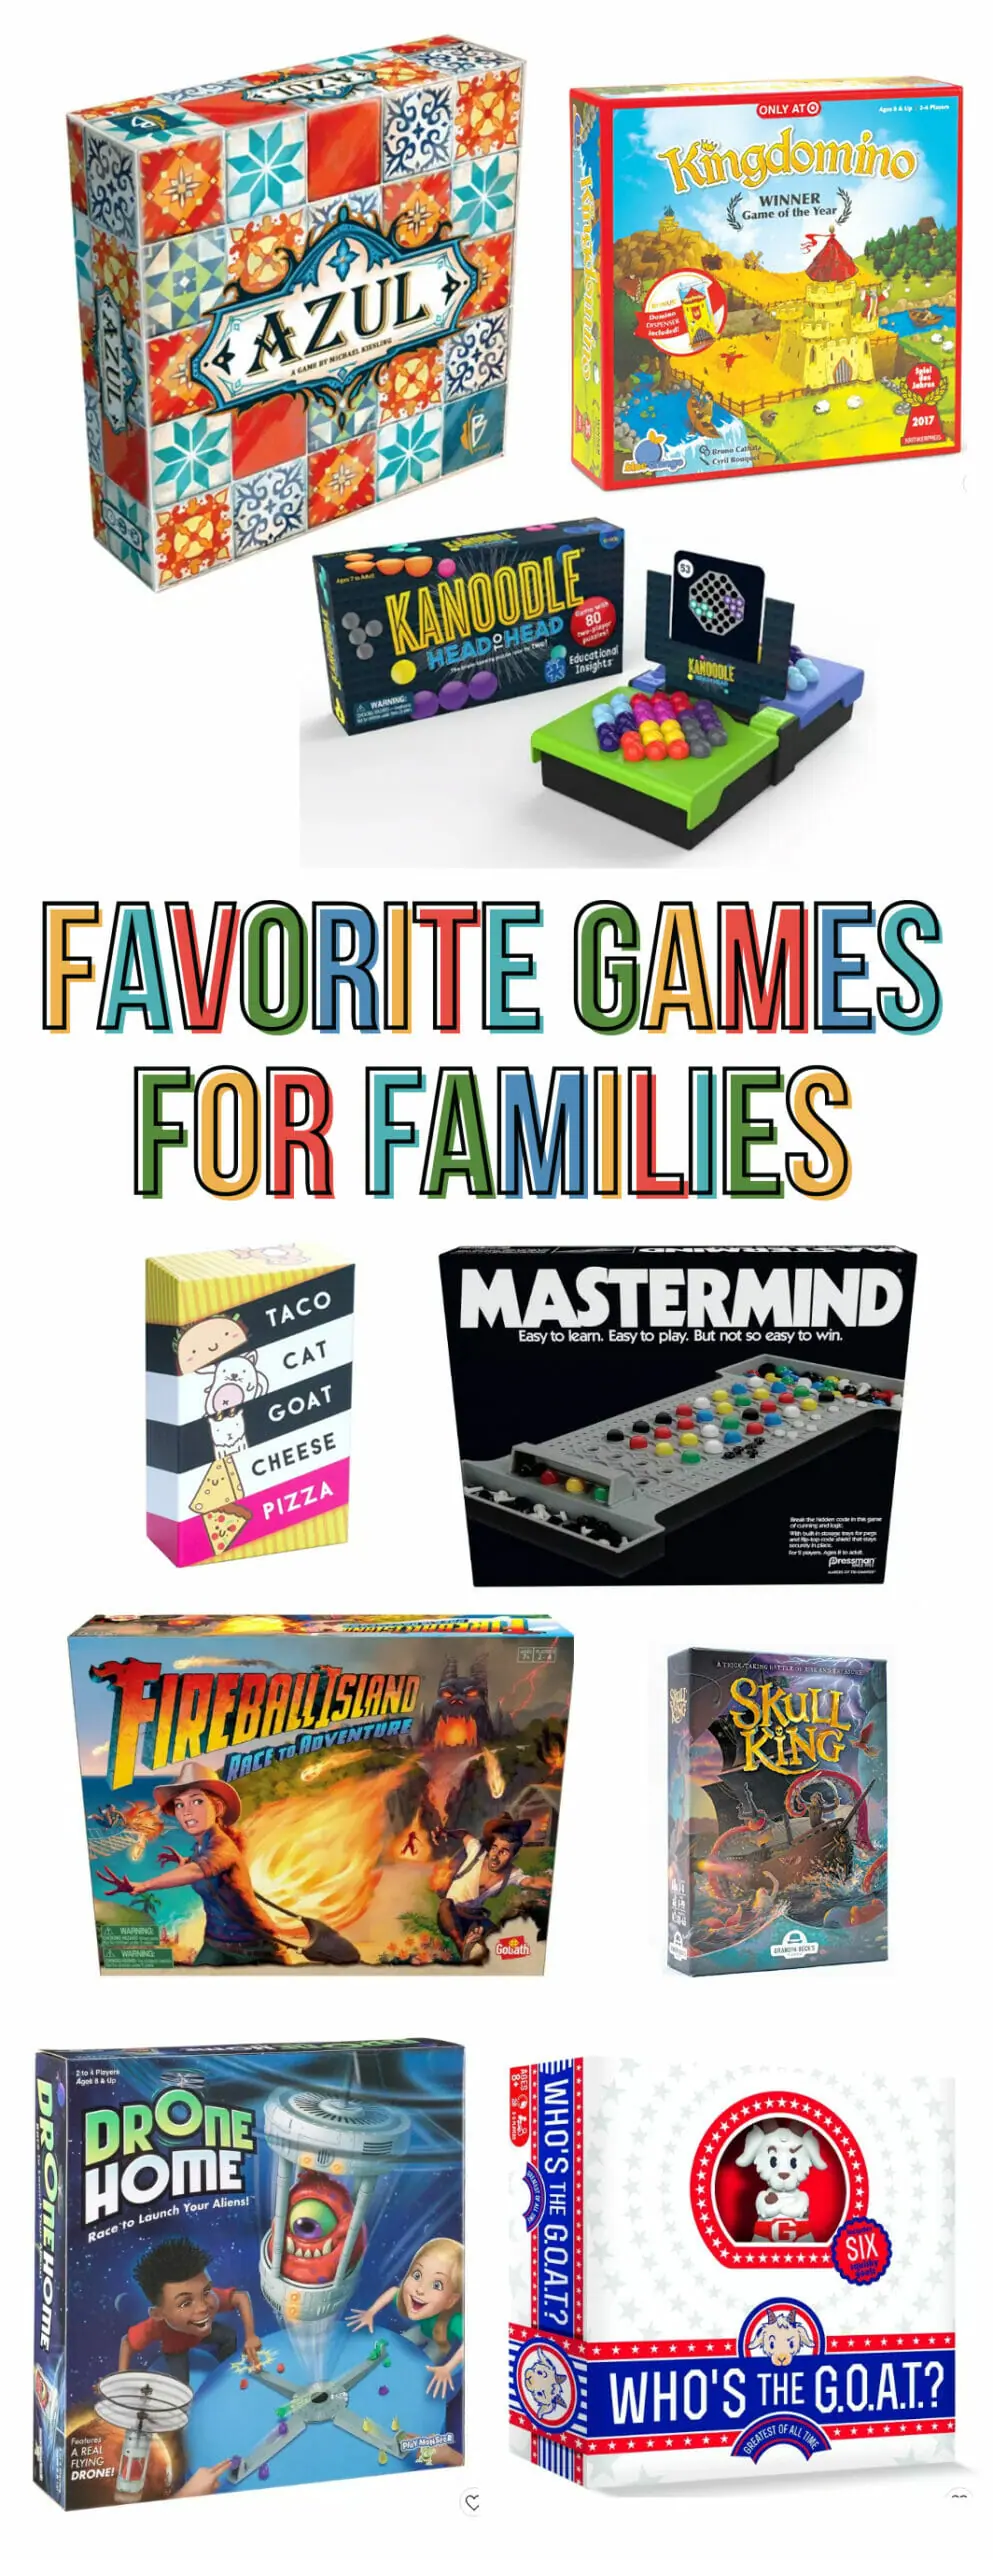 Several board and card game cover images on a white background. Games include Azul, Mastermind, Taco Cat Goat Cheese Pizza, Kingdomino, Skull King, Fireball Island, Drone Home, Who's the G.O.A.T?, and Kanoodle.